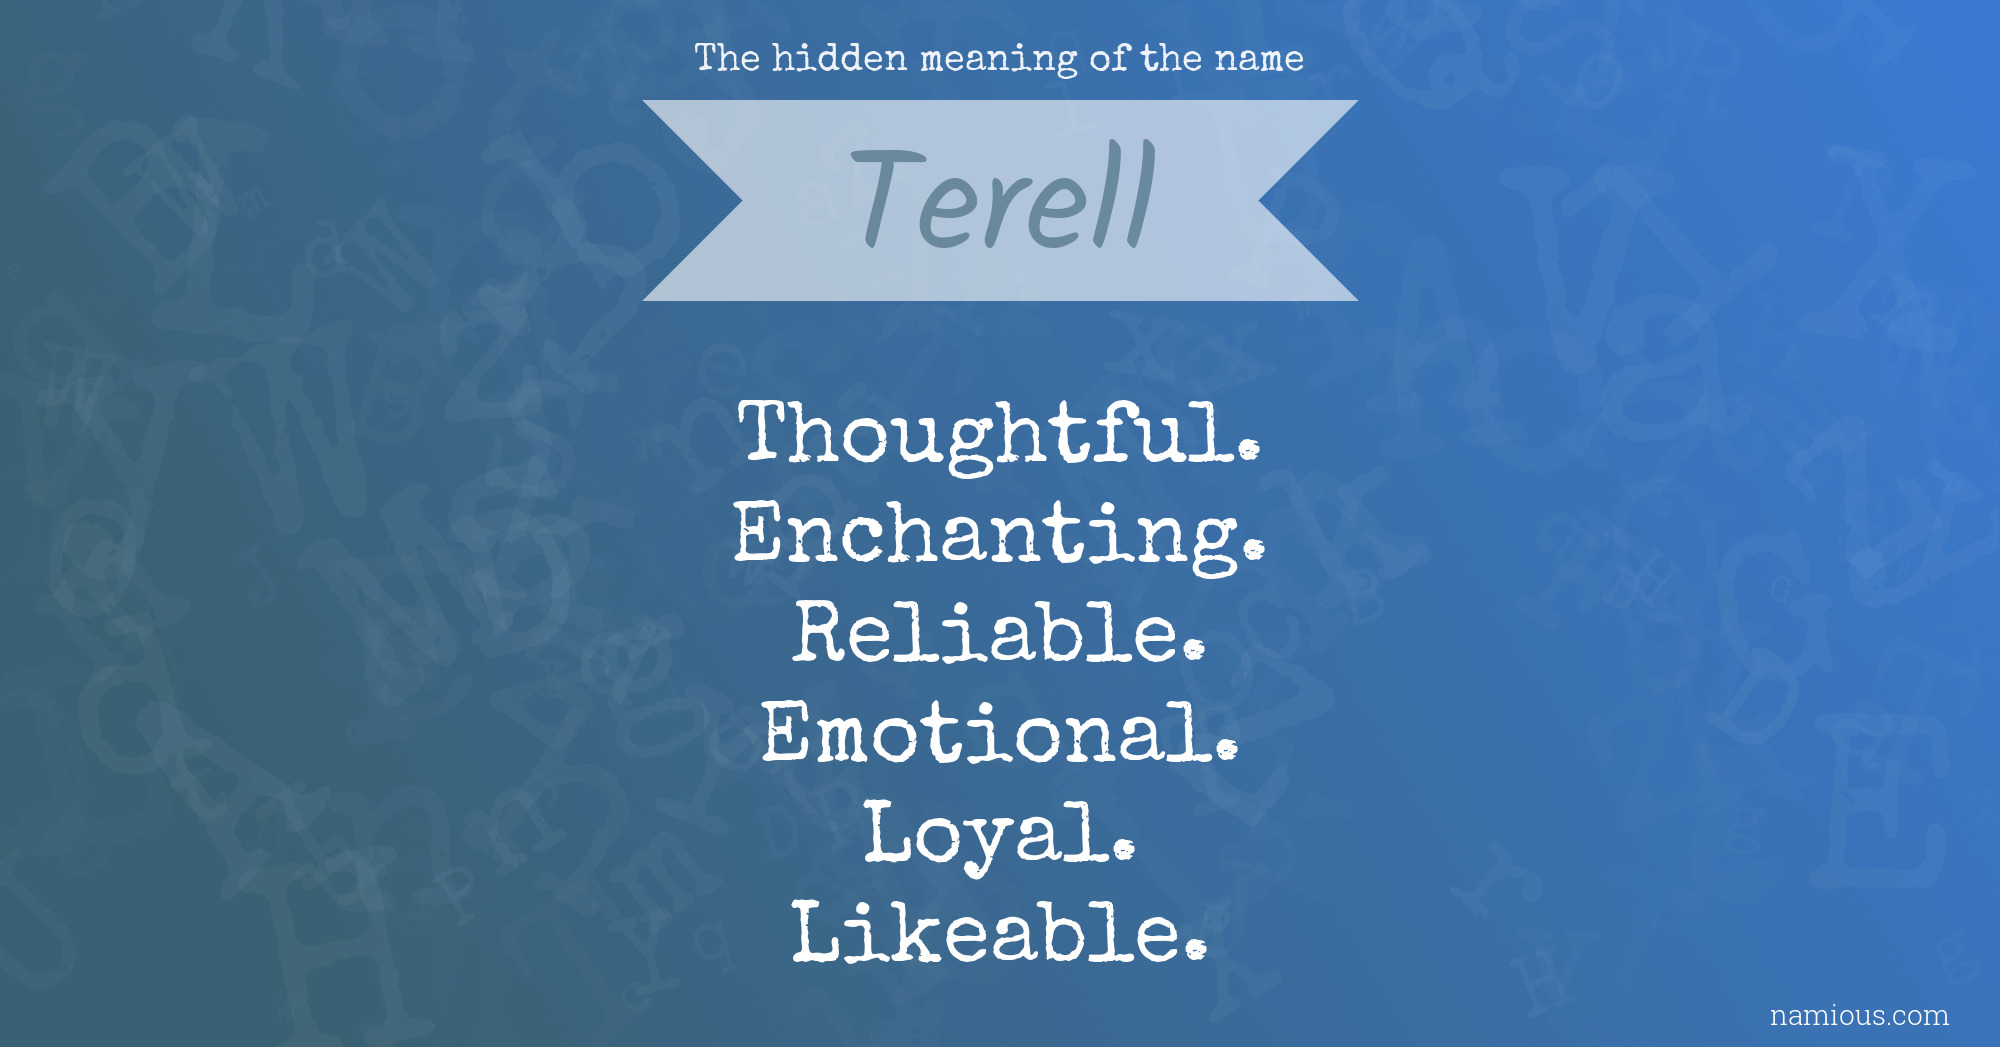 The hidden meaning of the name Terell